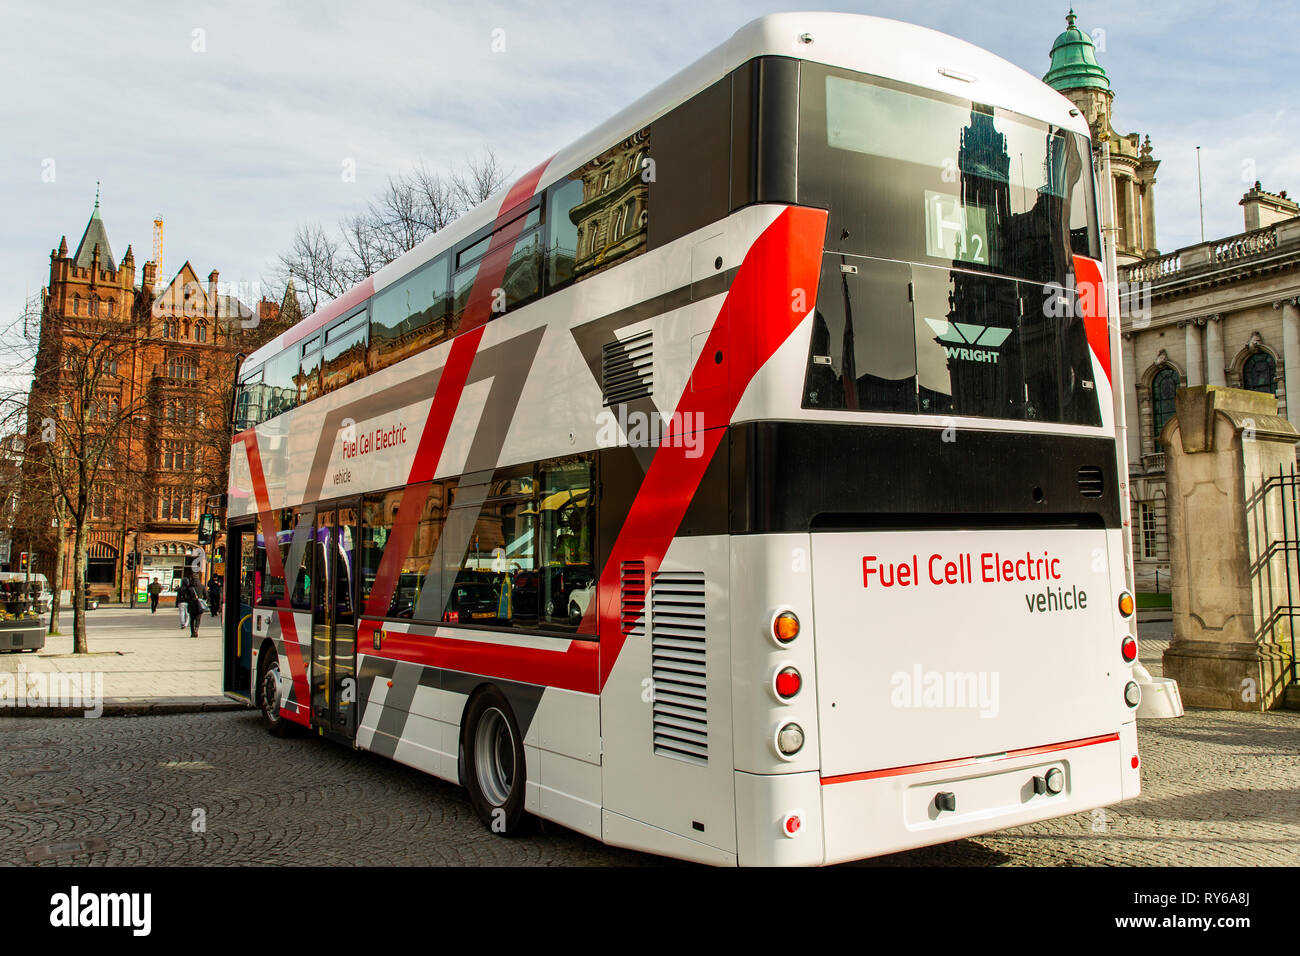 Belfast City Hall,Belfast,UK 12 March 2019. Wrightbus hydrogen fuel cell bus on display outside Belfast City Hall A new zero-emission bus which has a drive system that encompasses a hydrogen fuel cell and a battery pack to power the vehicle was on show outside Belfast City Hall. These two technologies will help to deliver highly innovative buses with the best possible fuel consumption and environmental credentials. Credit: Bonzo/Alamy Live News Stock Photo